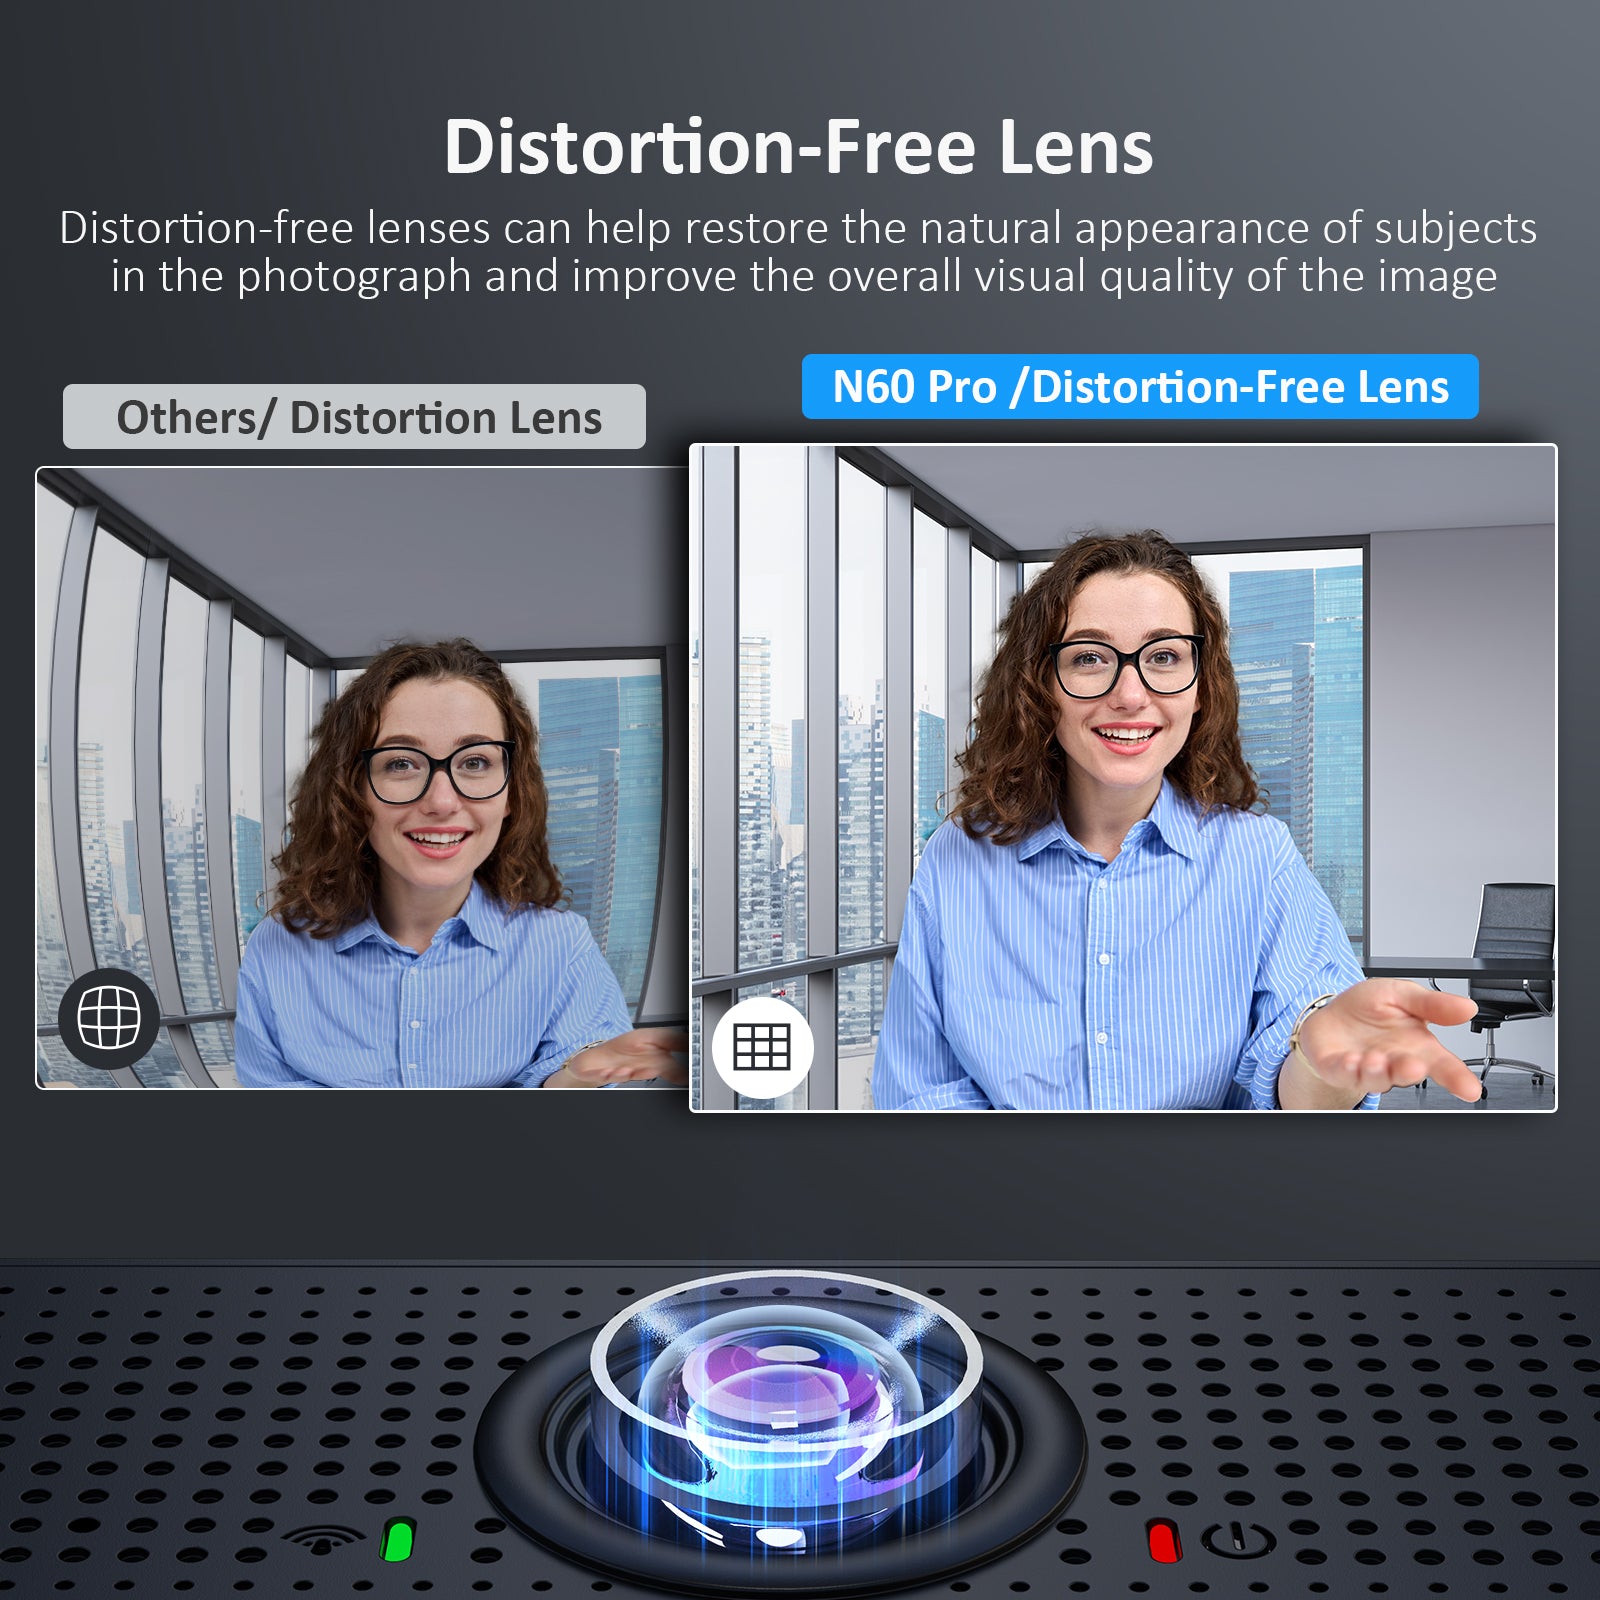 Comparison of Distortion-Free Lens of N60 Pro Camera with Distorted Lens Cameras from Other Brands